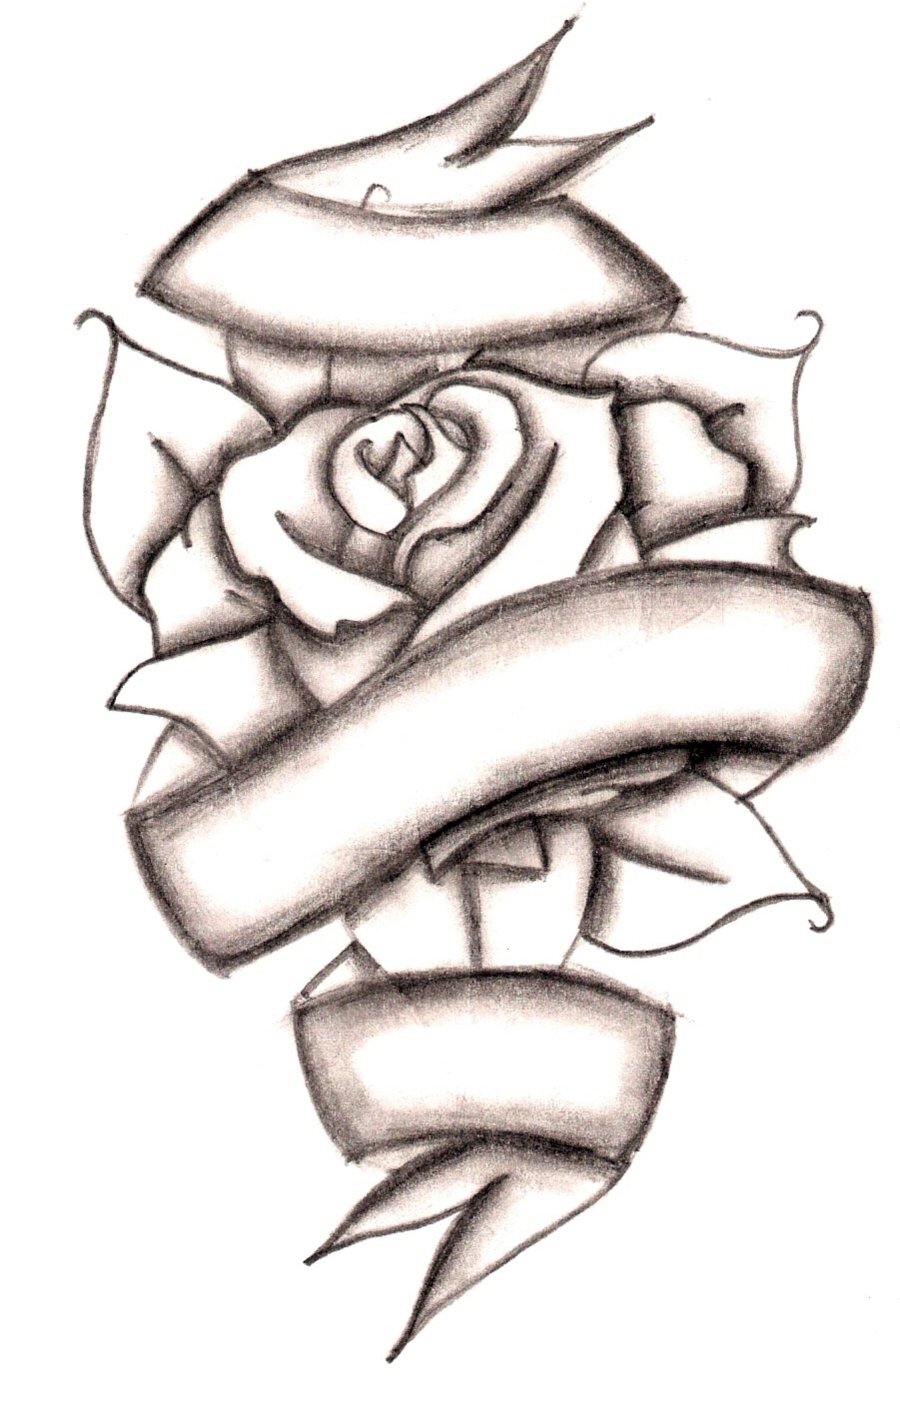 Cross And Rose Drawing - ClipArt Best